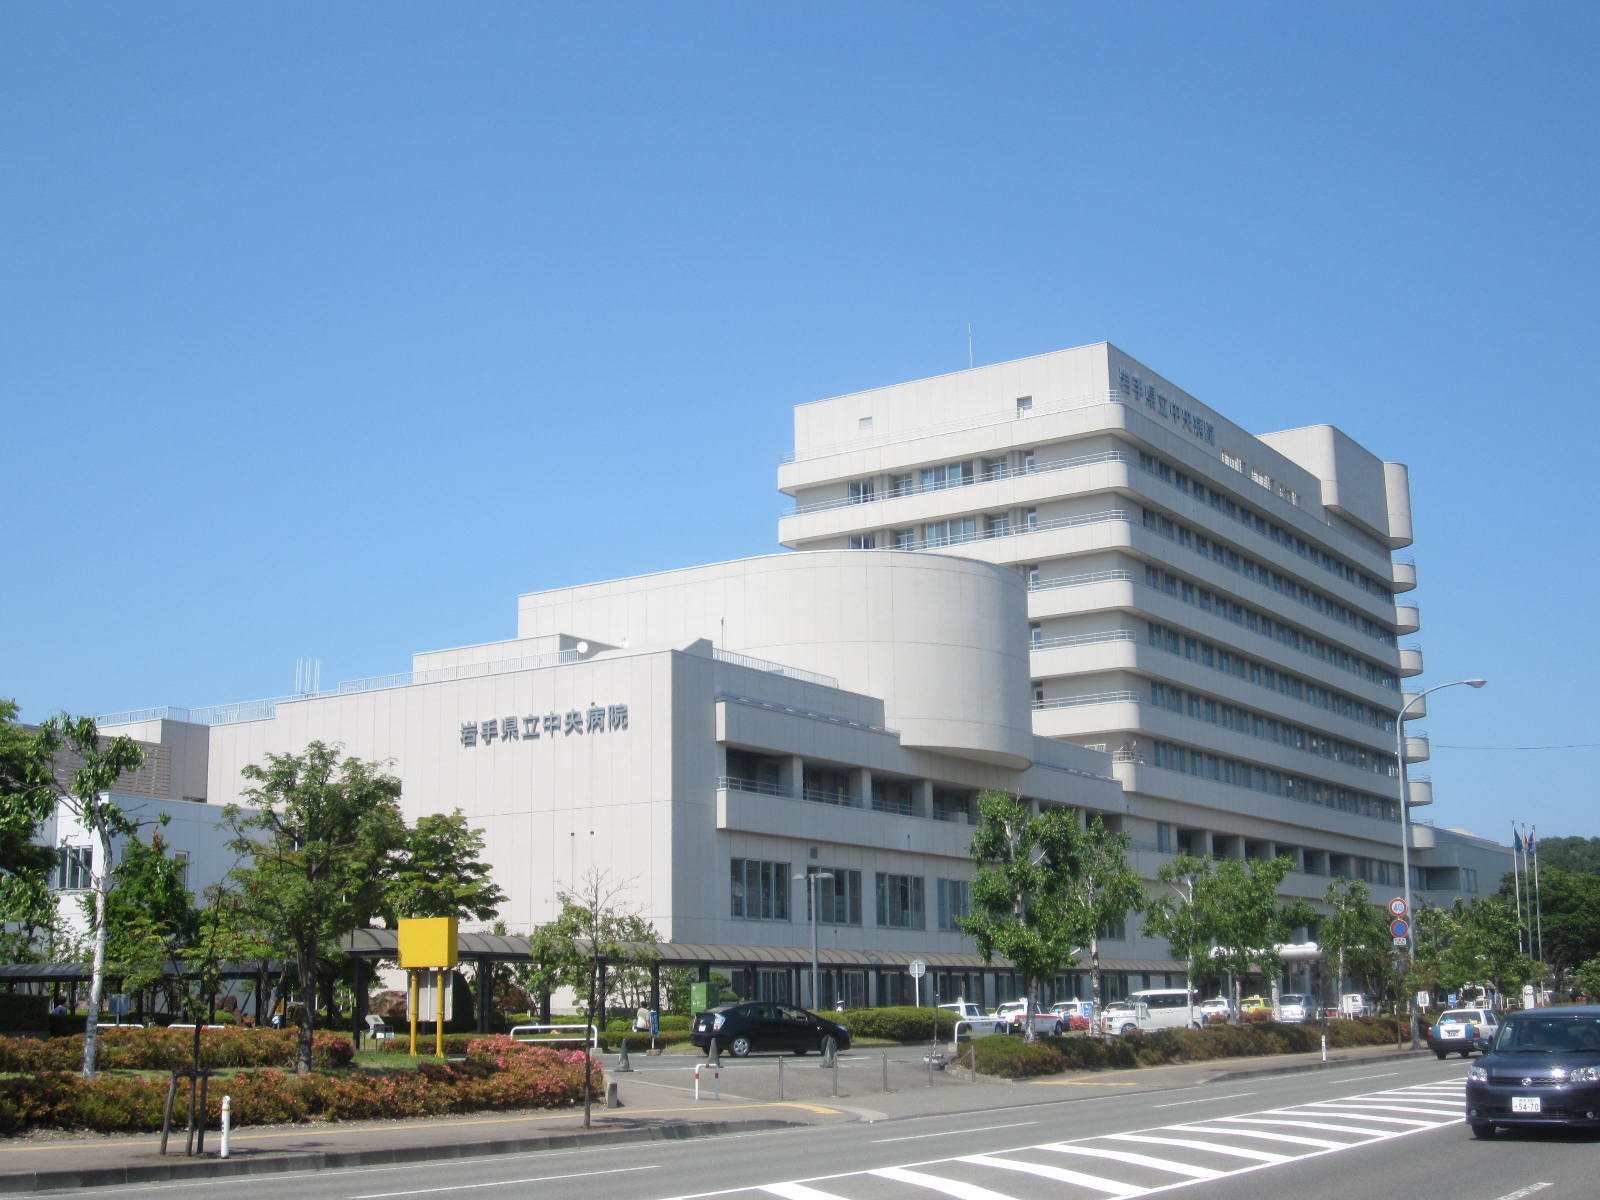 Hospital. 708m to the Iwate Prefectural Central Hospital (Hospital)